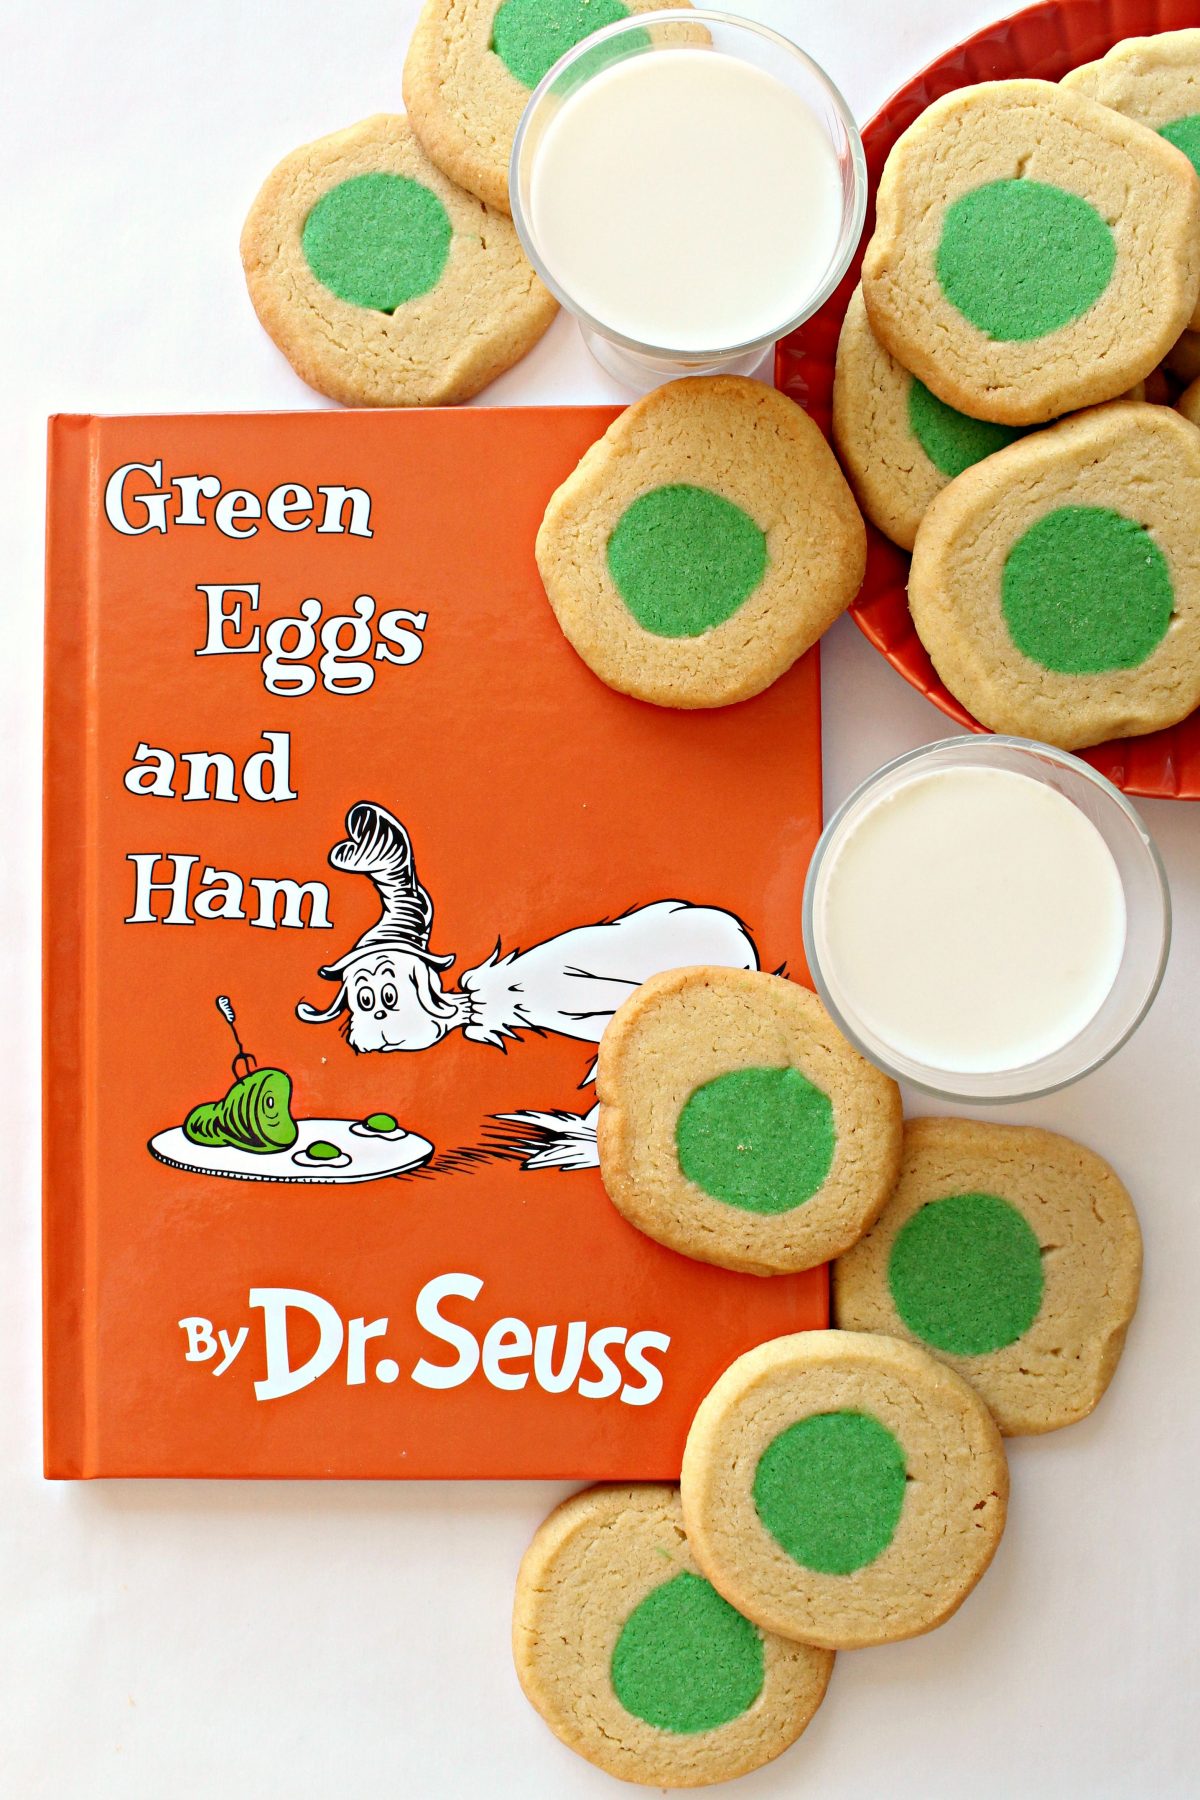 Green Eggs and Ham book with cookies with green circle centers and milk.